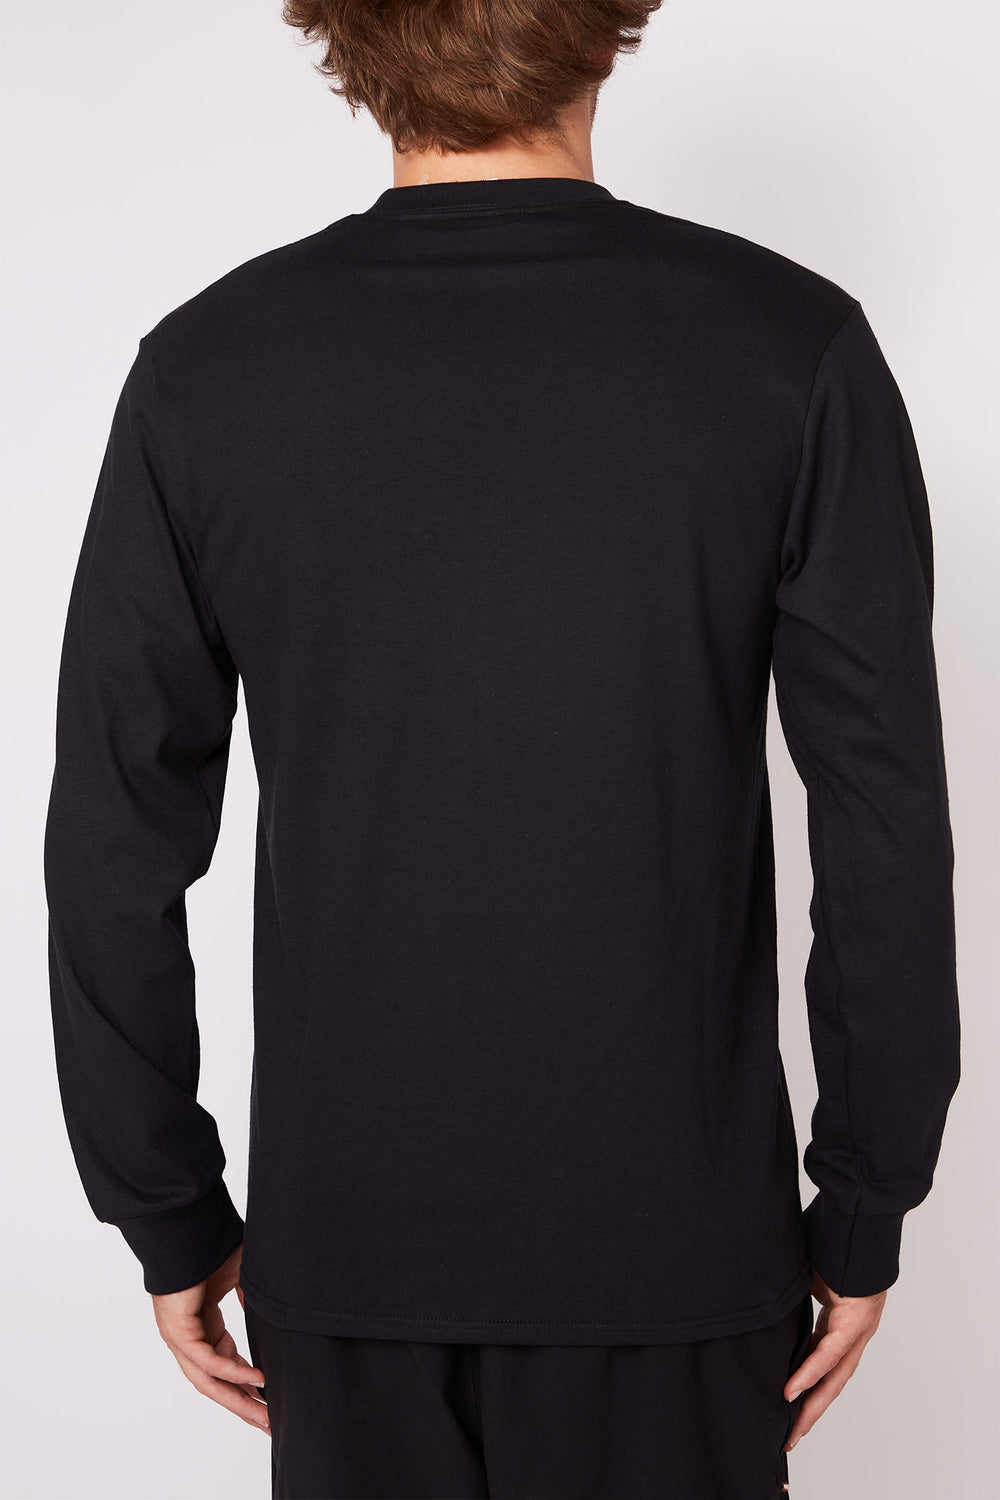 HUF Bookend Long Sleeve Top Black